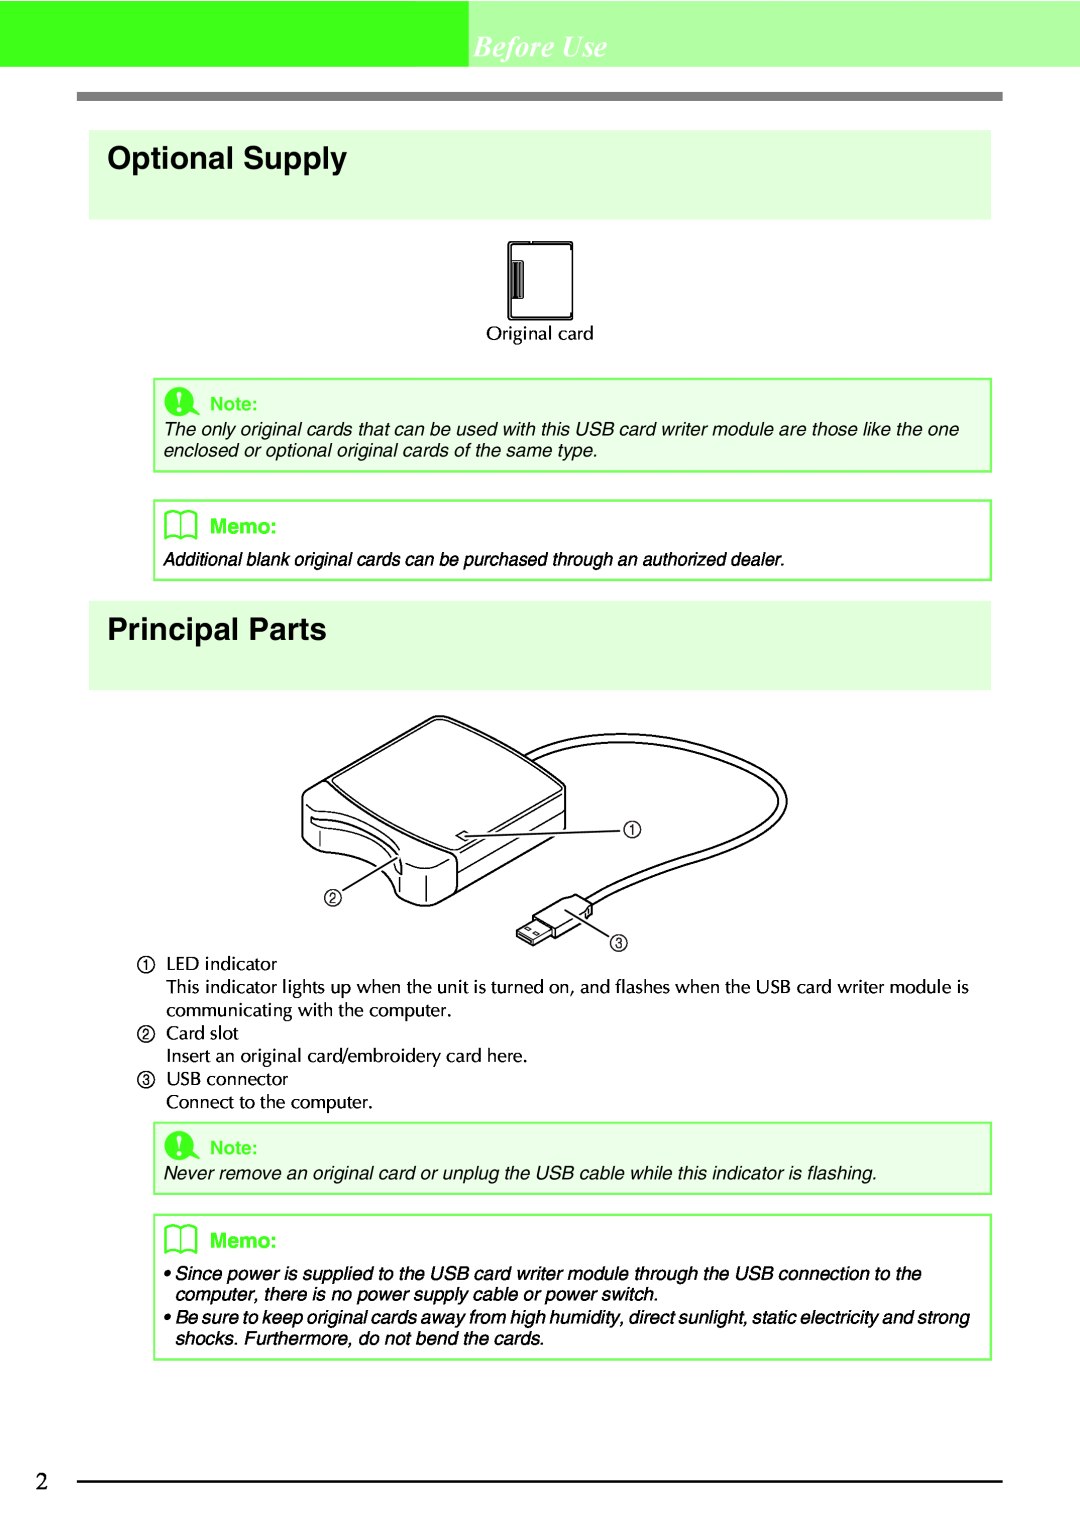 Brother PE-DESIGN, Brother USB Writer manual Optional Supply, Principal Parts, Before Use, b Memo, a Note 